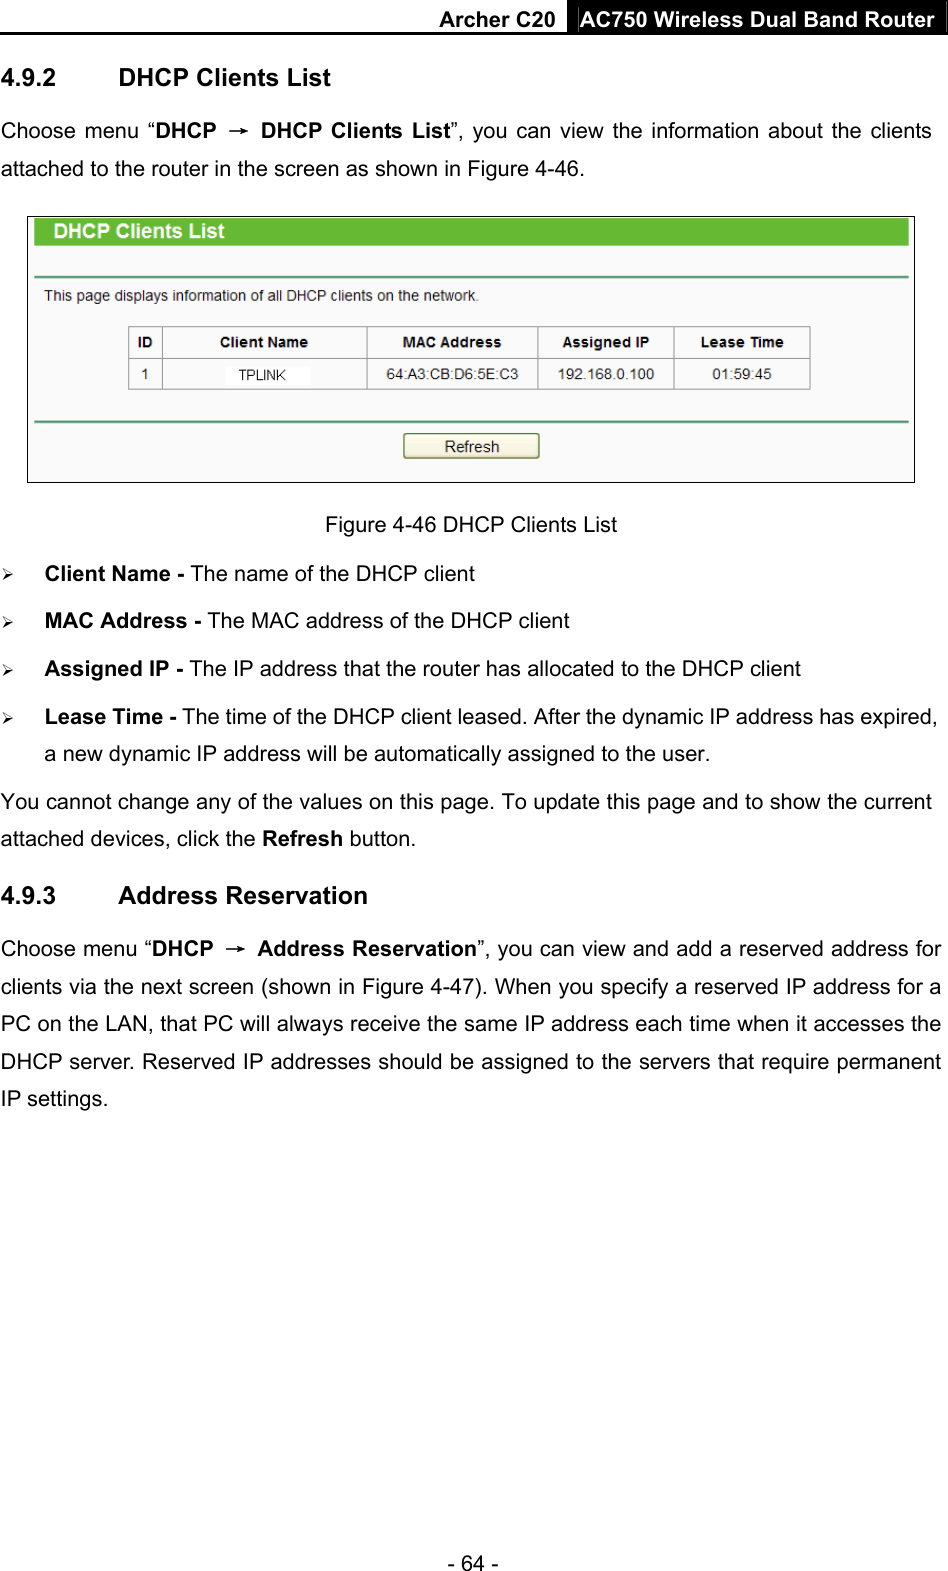 Archer C20 AC750 Wireless Dual Band Router - 64 - 4.9.2  DHCP Clients List Choose menu “DHCP  →  DHCP Clients List”, you can view the information about the clients attached to the router in the screen as shown in Figure 4-46.  Figure 4-46 DHCP Clients List  Client Name - The name of the DHCP client    MAC Address - The MAC address of the DHCP client    Assigned IP - The IP address that the router has allocated to the DHCP client  Lease Time - The time of the DHCP client leased. After the dynamic IP address has expired, a new dynamic IP address will be automatically assigned to the user.     You cannot change any of the values on this page. To update this page and to show the current attached devices, click the Refresh button. 4.9.3  Address Reservation Choose menu “DHCP  → Address Reservation”, you can view and add a reserved address for clients via the next screen (shown in Figure 4-47). When you specify a reserved IP address for a PC on the LAN, that PC will always receive the same IP address each time when it accesses the DHCP server. Reserved IP addresses should be assigned to the servers that require permanent IP settings.   